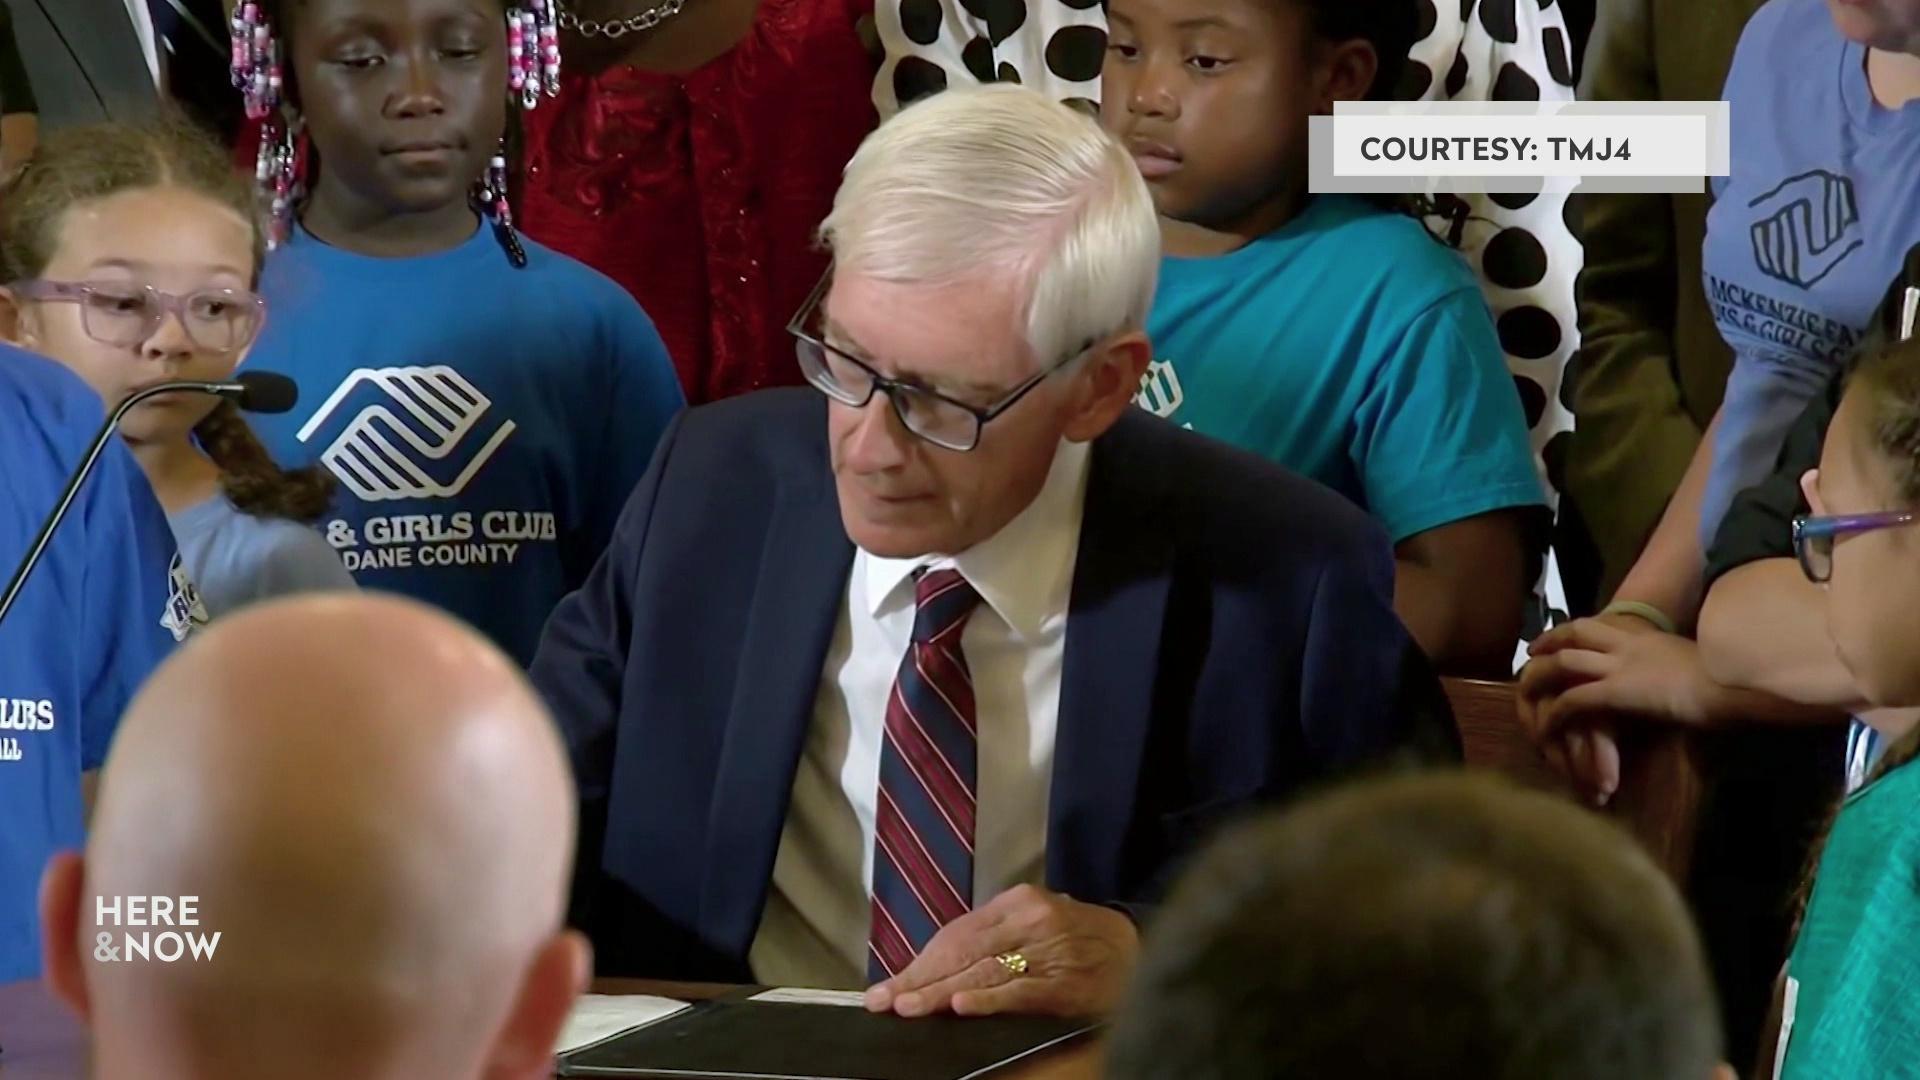 A still image shows Tony Evers signing a paper surrounded by people of various ages.